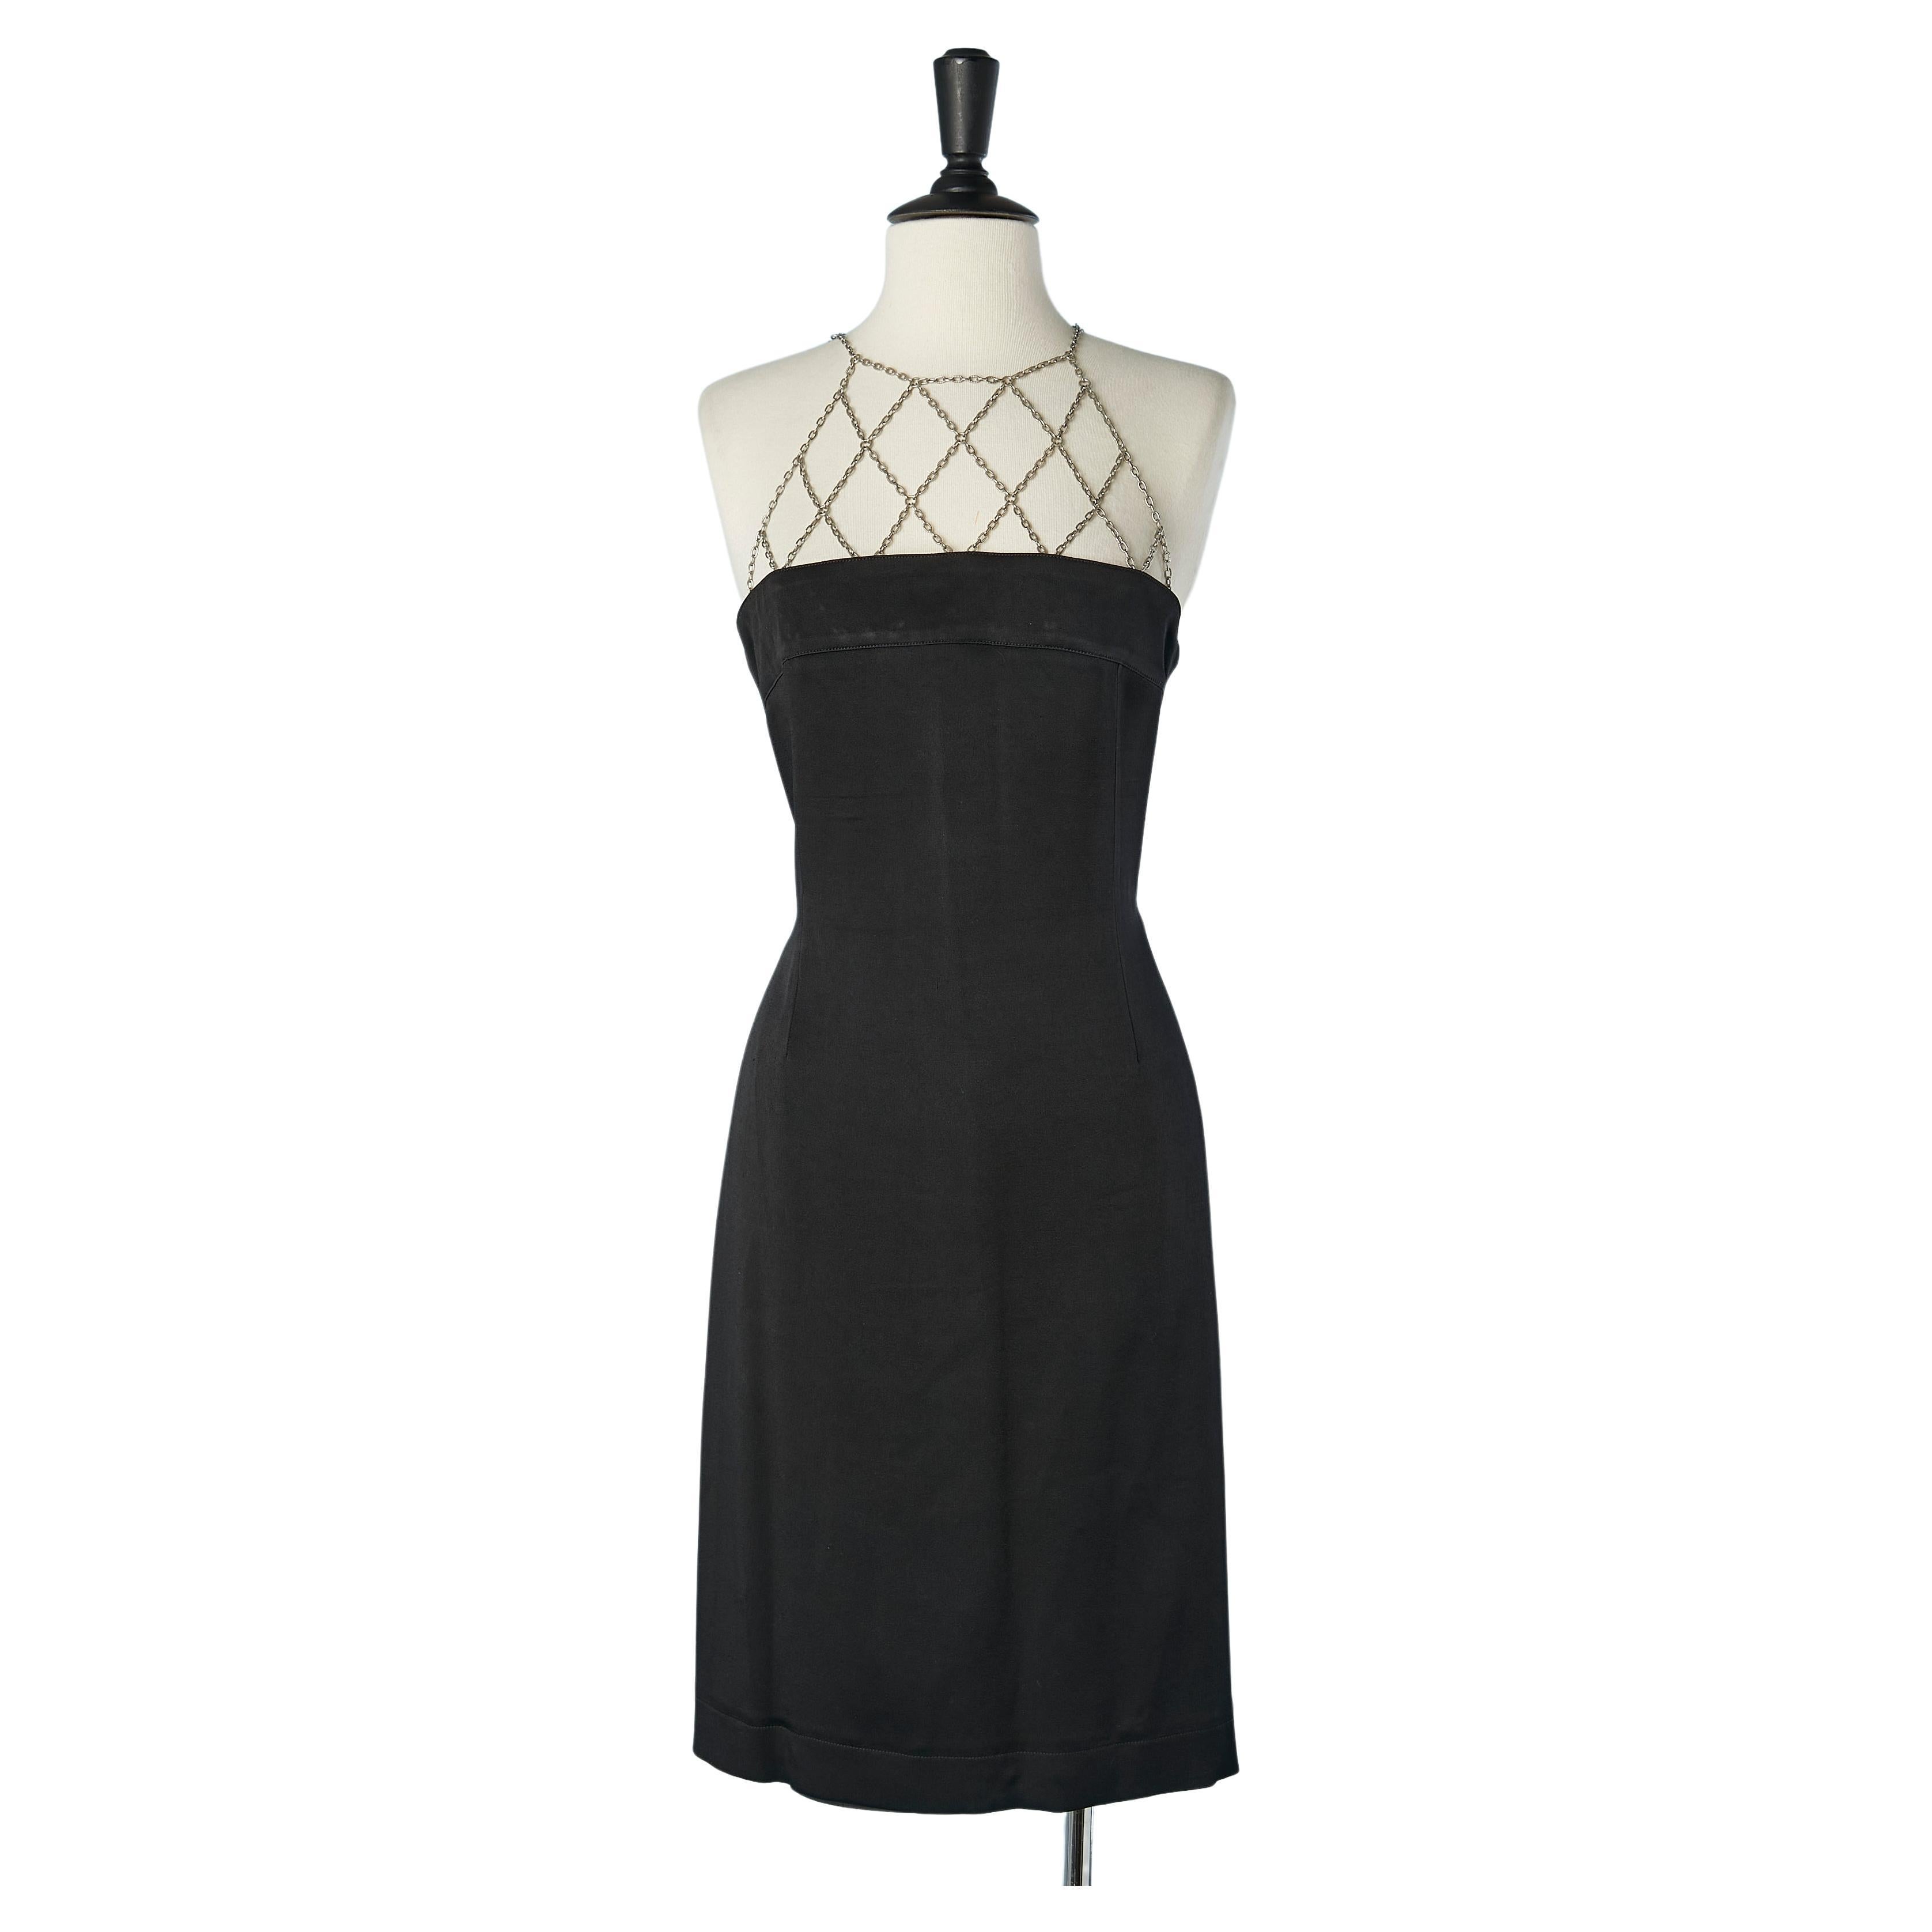 Black cocktail dress with chains on the neckline and back Paco Rabanne 